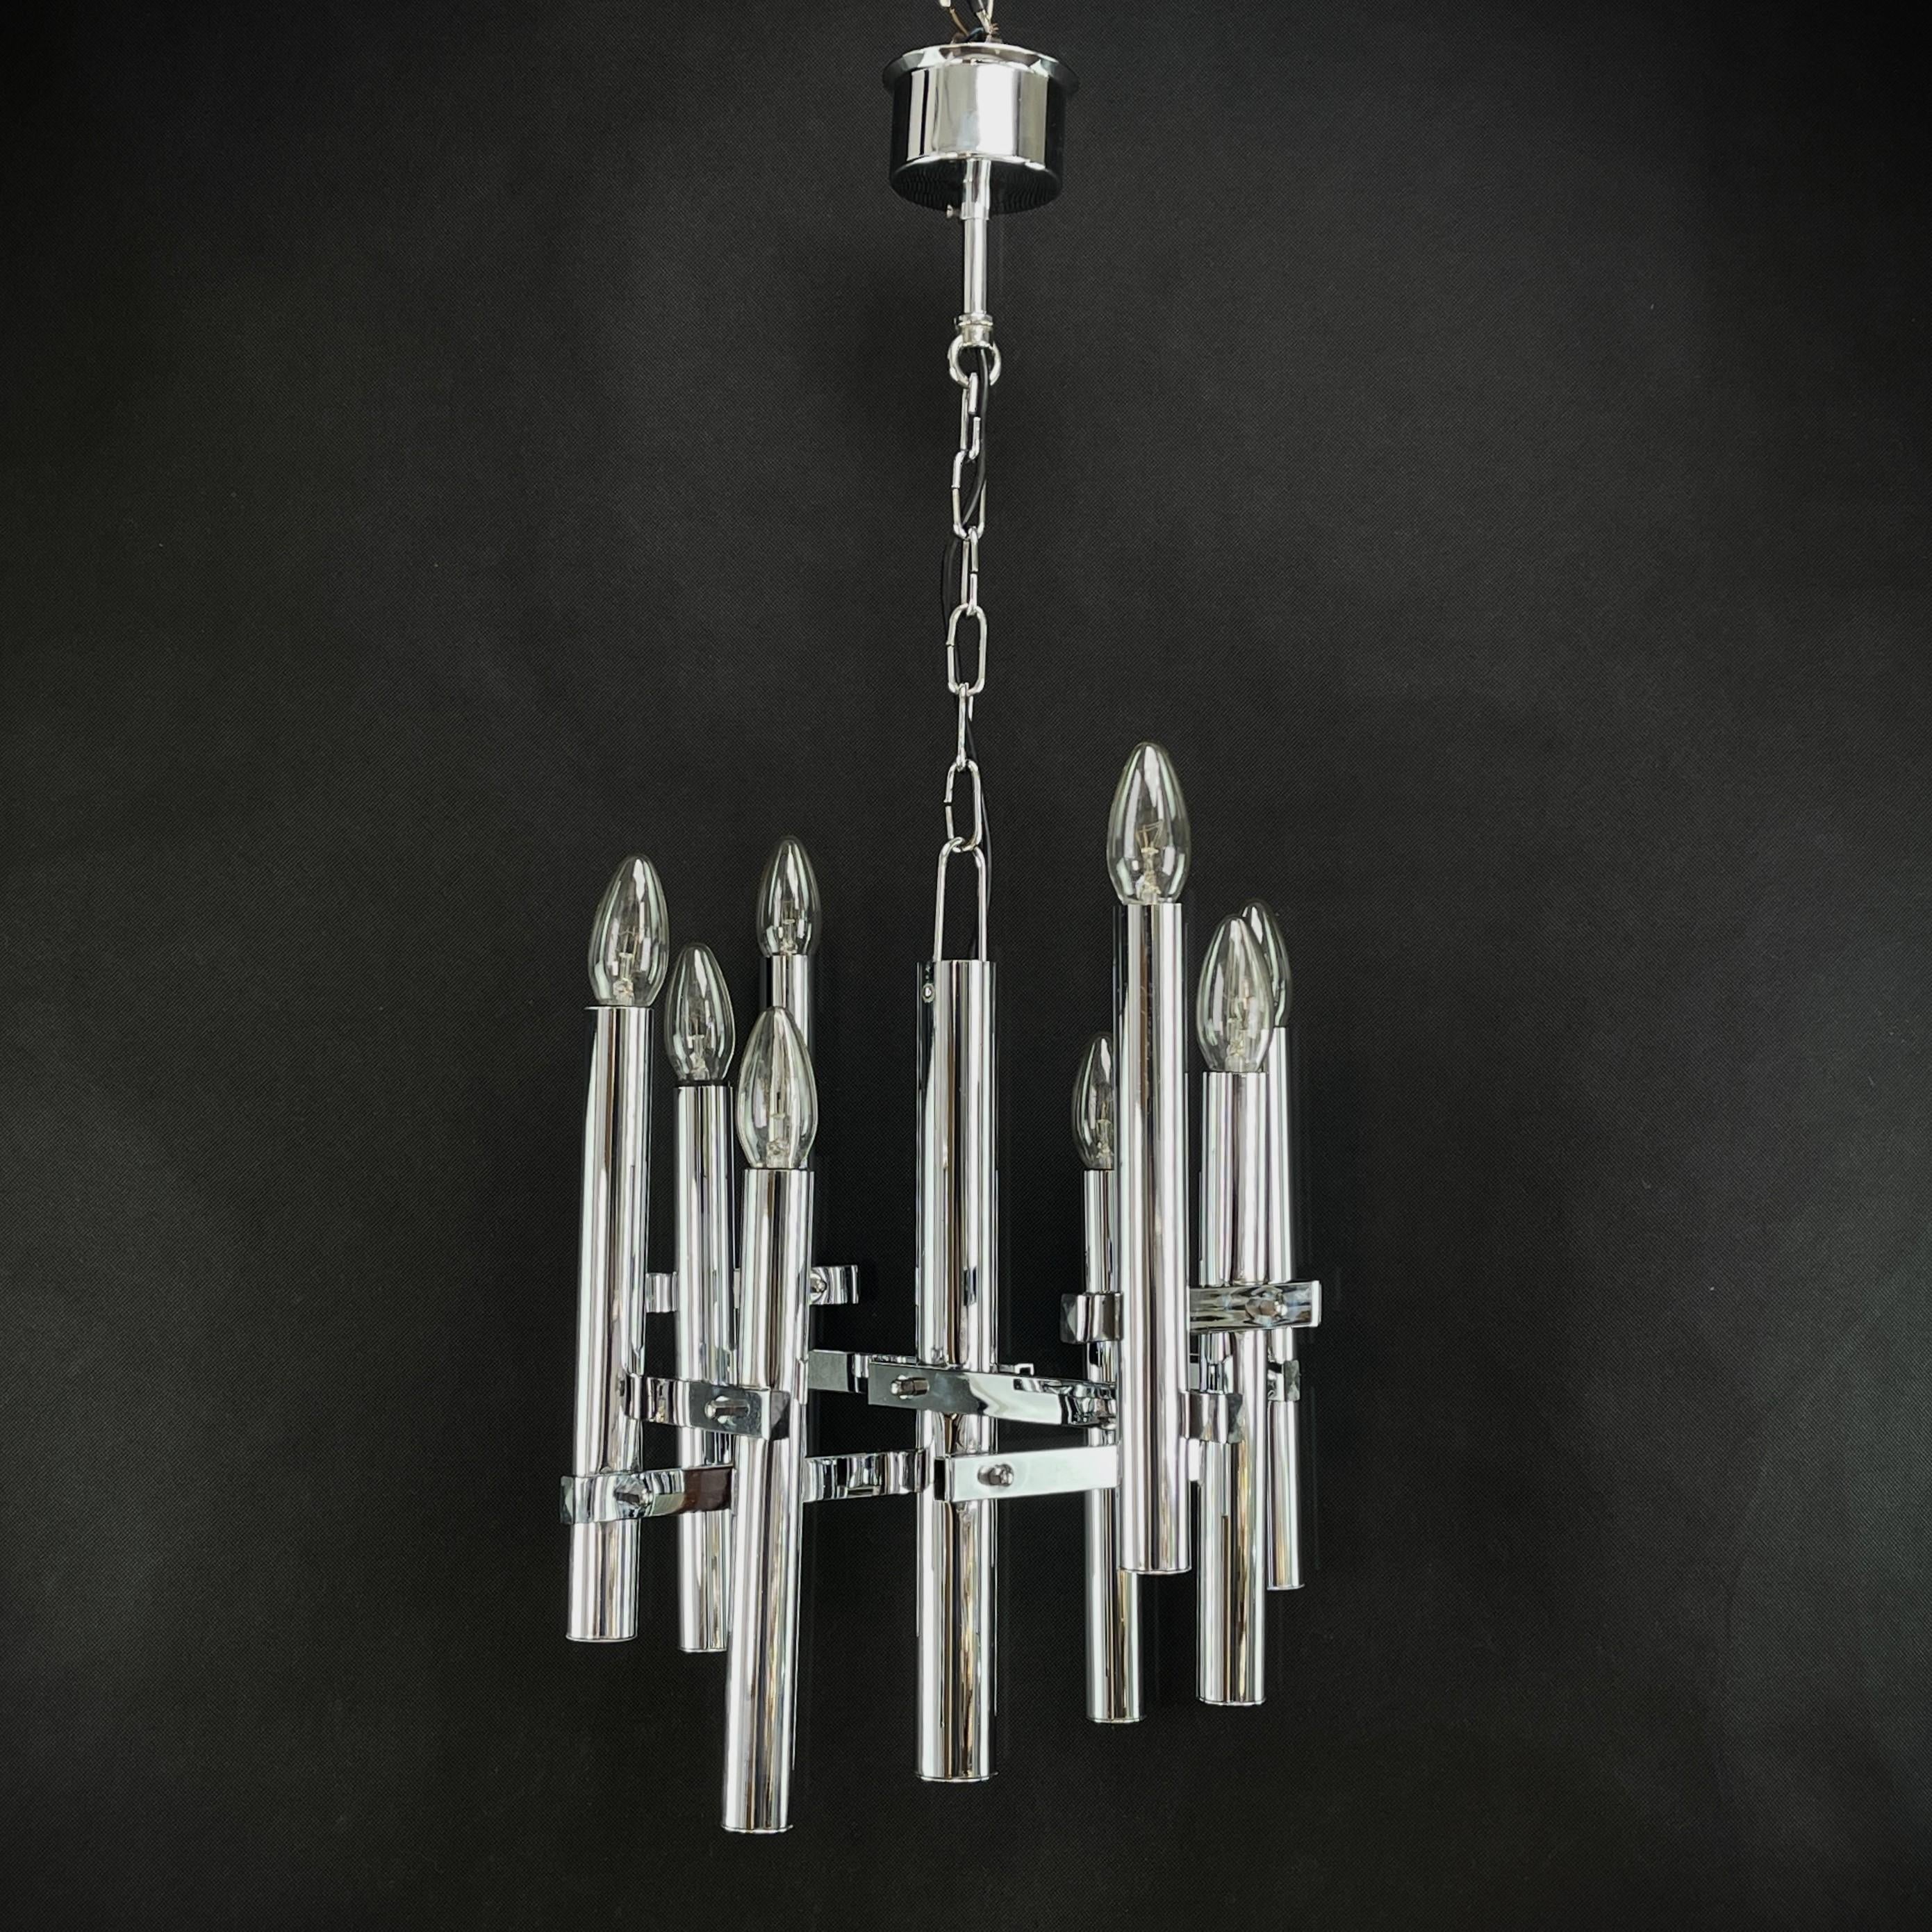 Silver Ceiling Lamp by Gaetano Sciolari - 1970s

The silver ceiling lamp by Gaetano Sciolari, made in 1970, is a truly iconic piece of modern lighting art. The designer, known for his groundbreaking work in the field of lighting, has created a